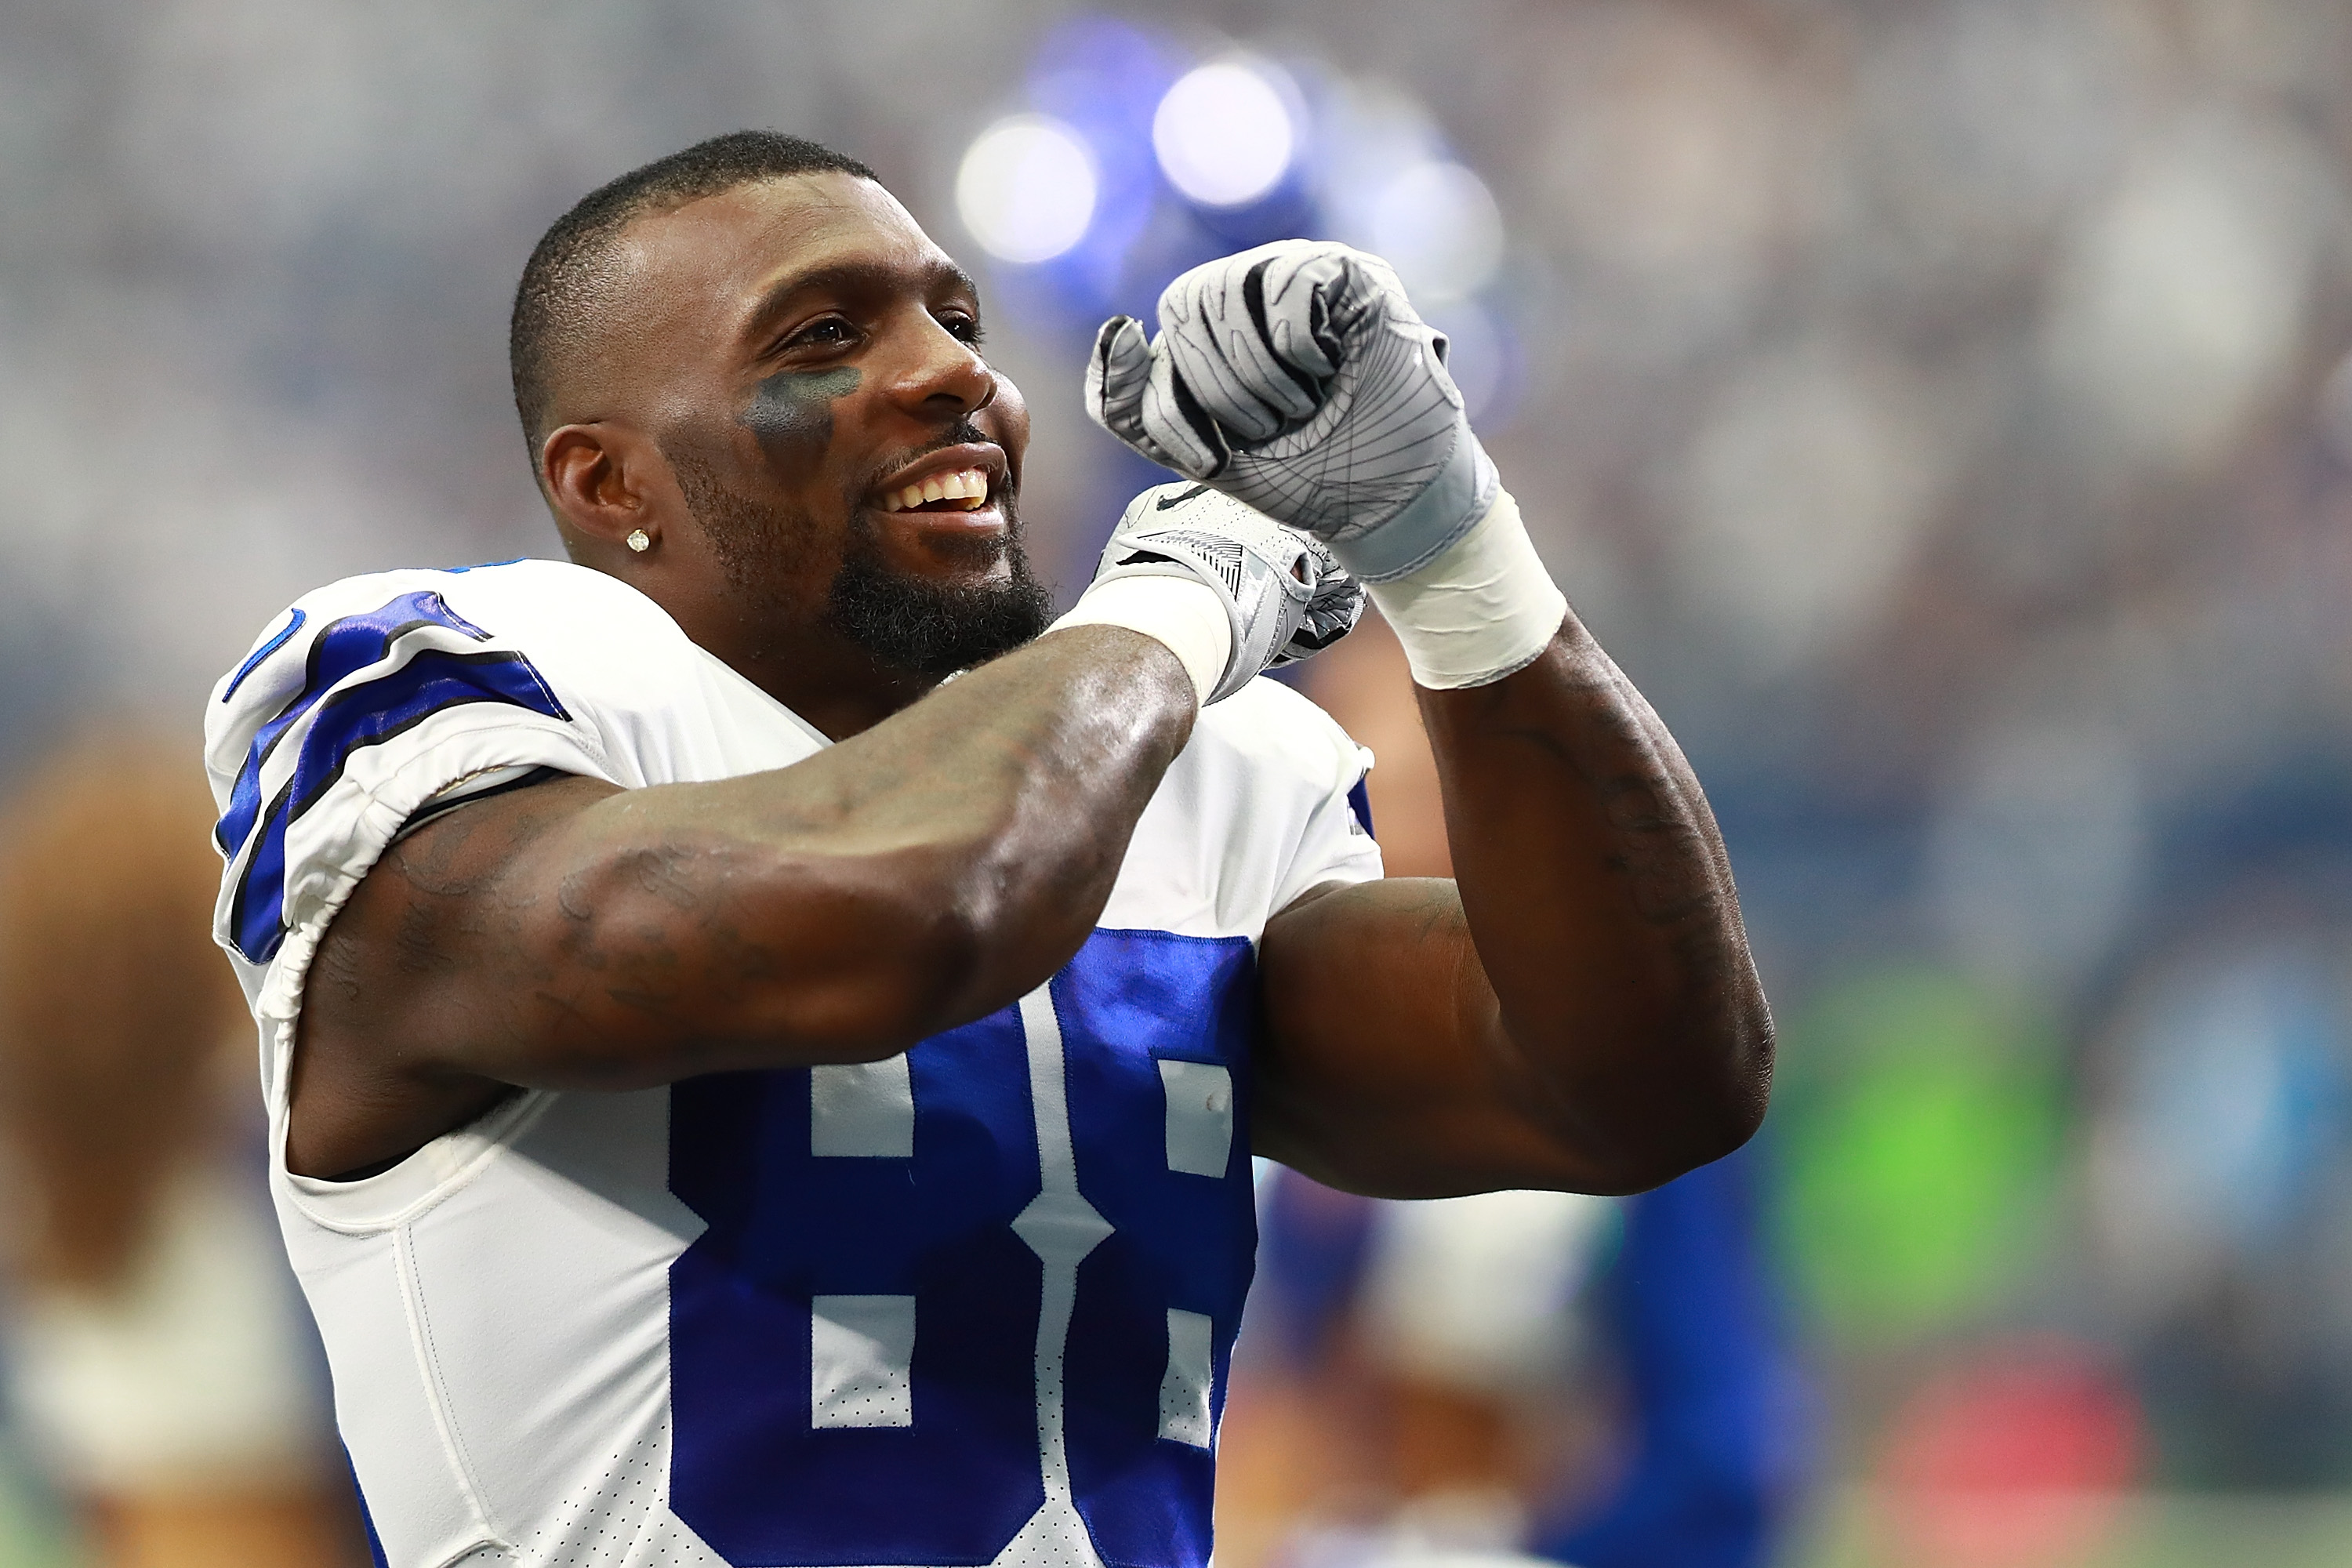 Dez Bryant has not played in the NFL since the 2017 season. Could he soon make a comeback with an NFC team that isn't the Cowboys?